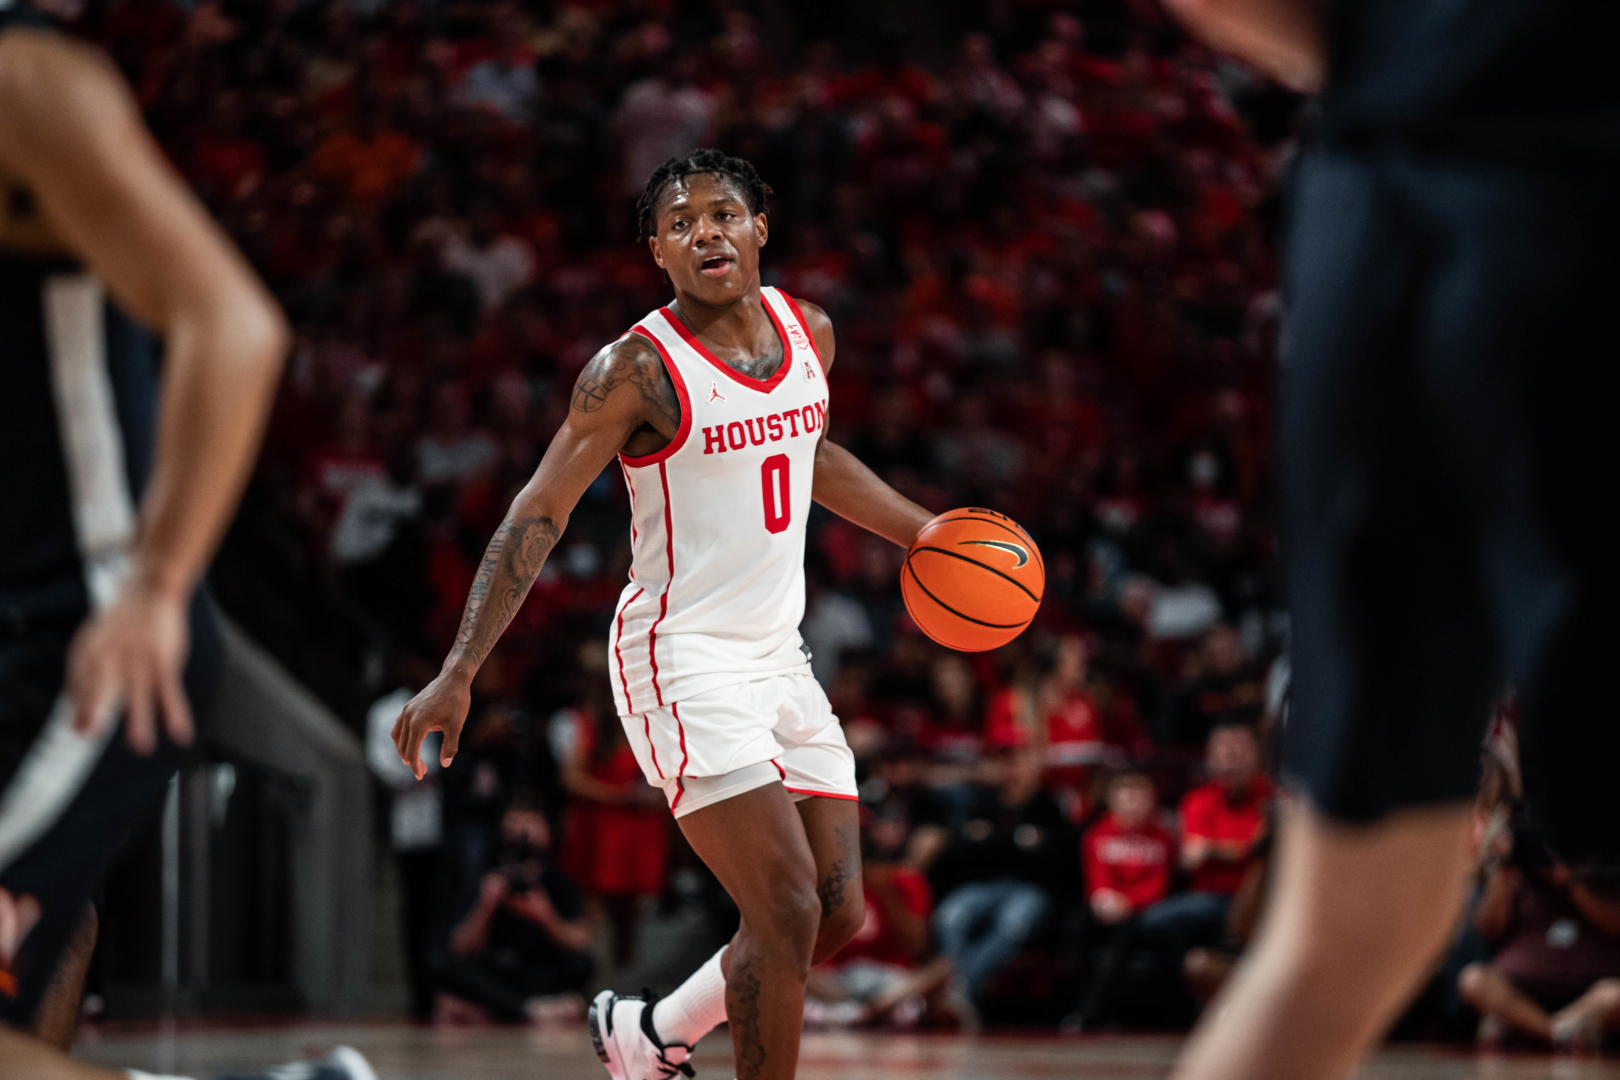 Marcus Sasser led UH in scoring, averaging 17.7 points per game, early in the 2021-22 season before suffering a season-ending foot injury in December. | James Schillinger/The Cougar